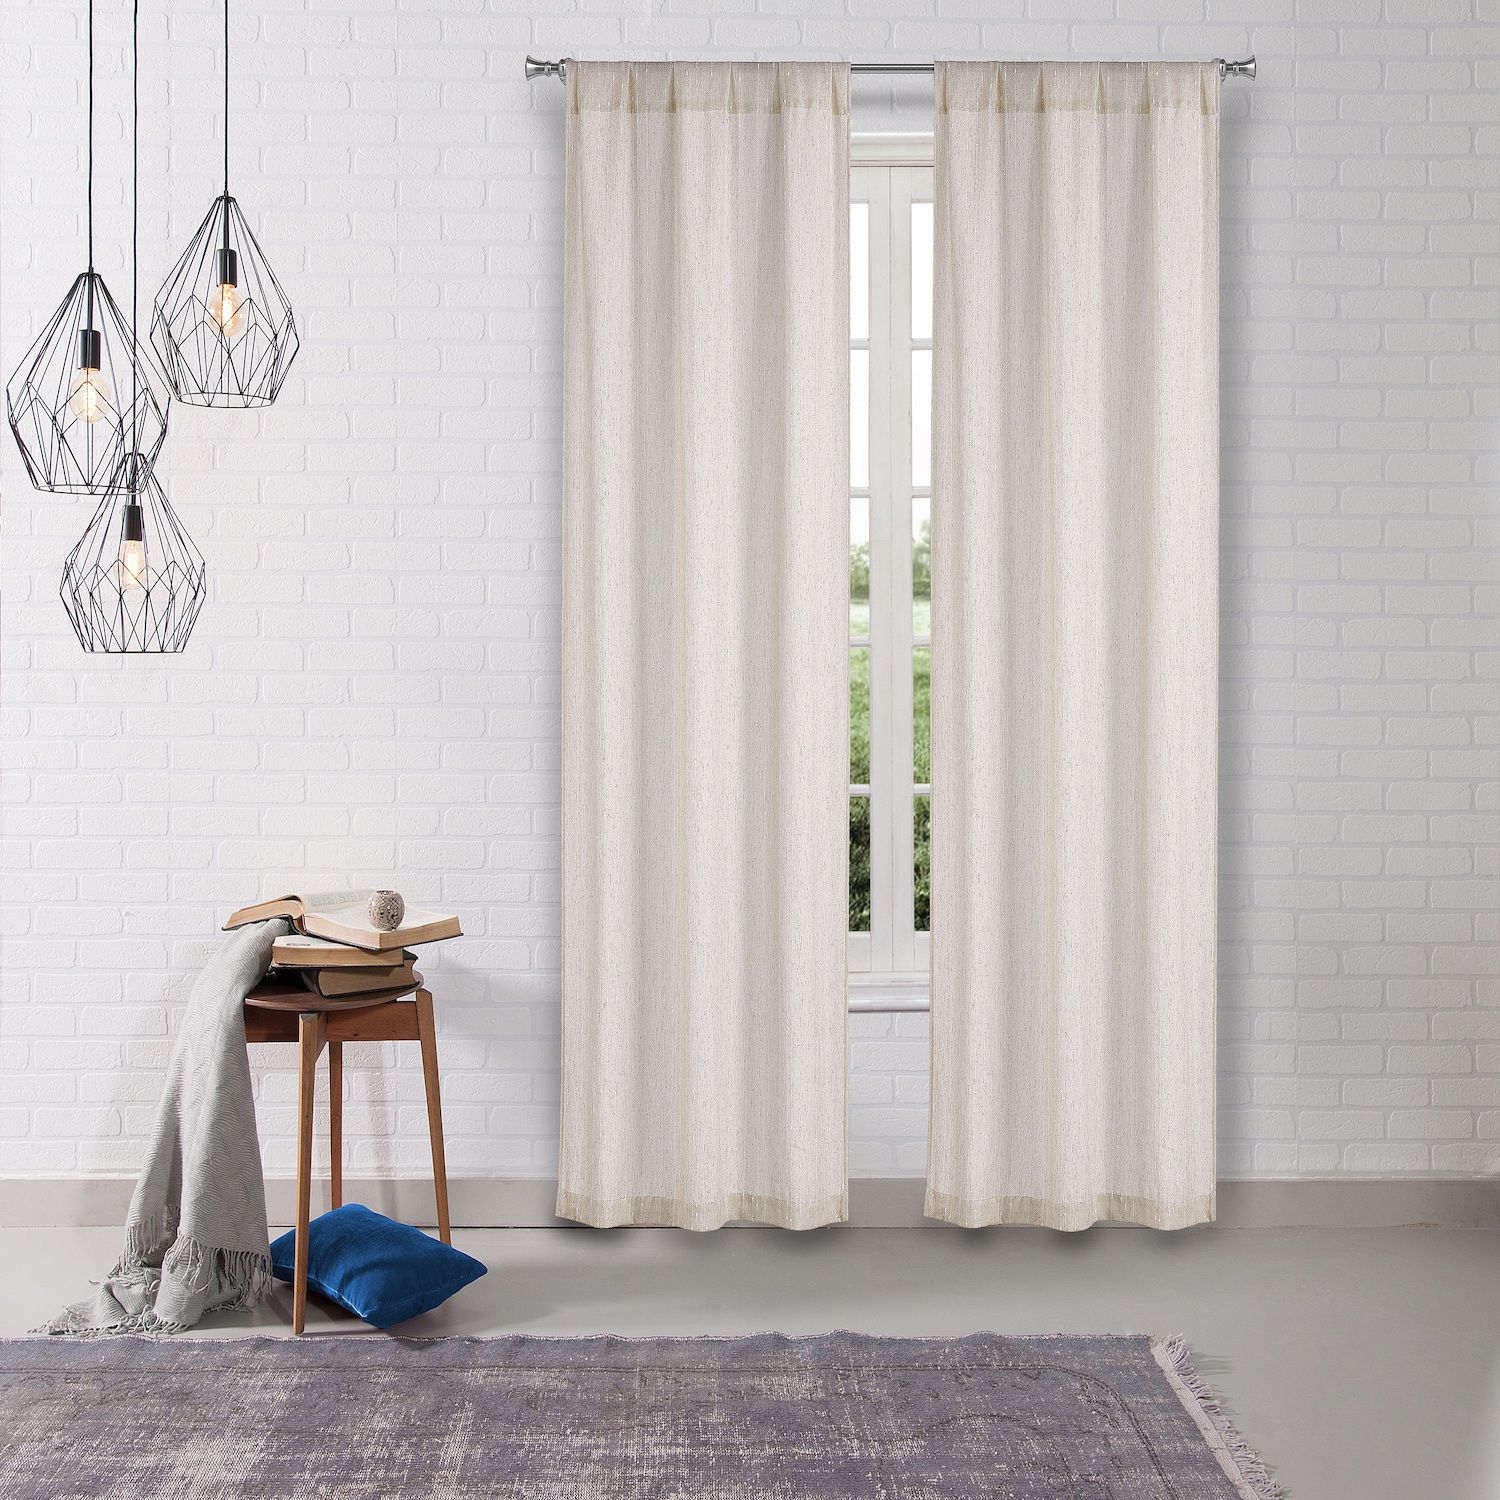 Image for Duck River Textile Demi Pompom 2-pack Window Curtain Set at Kohl's.